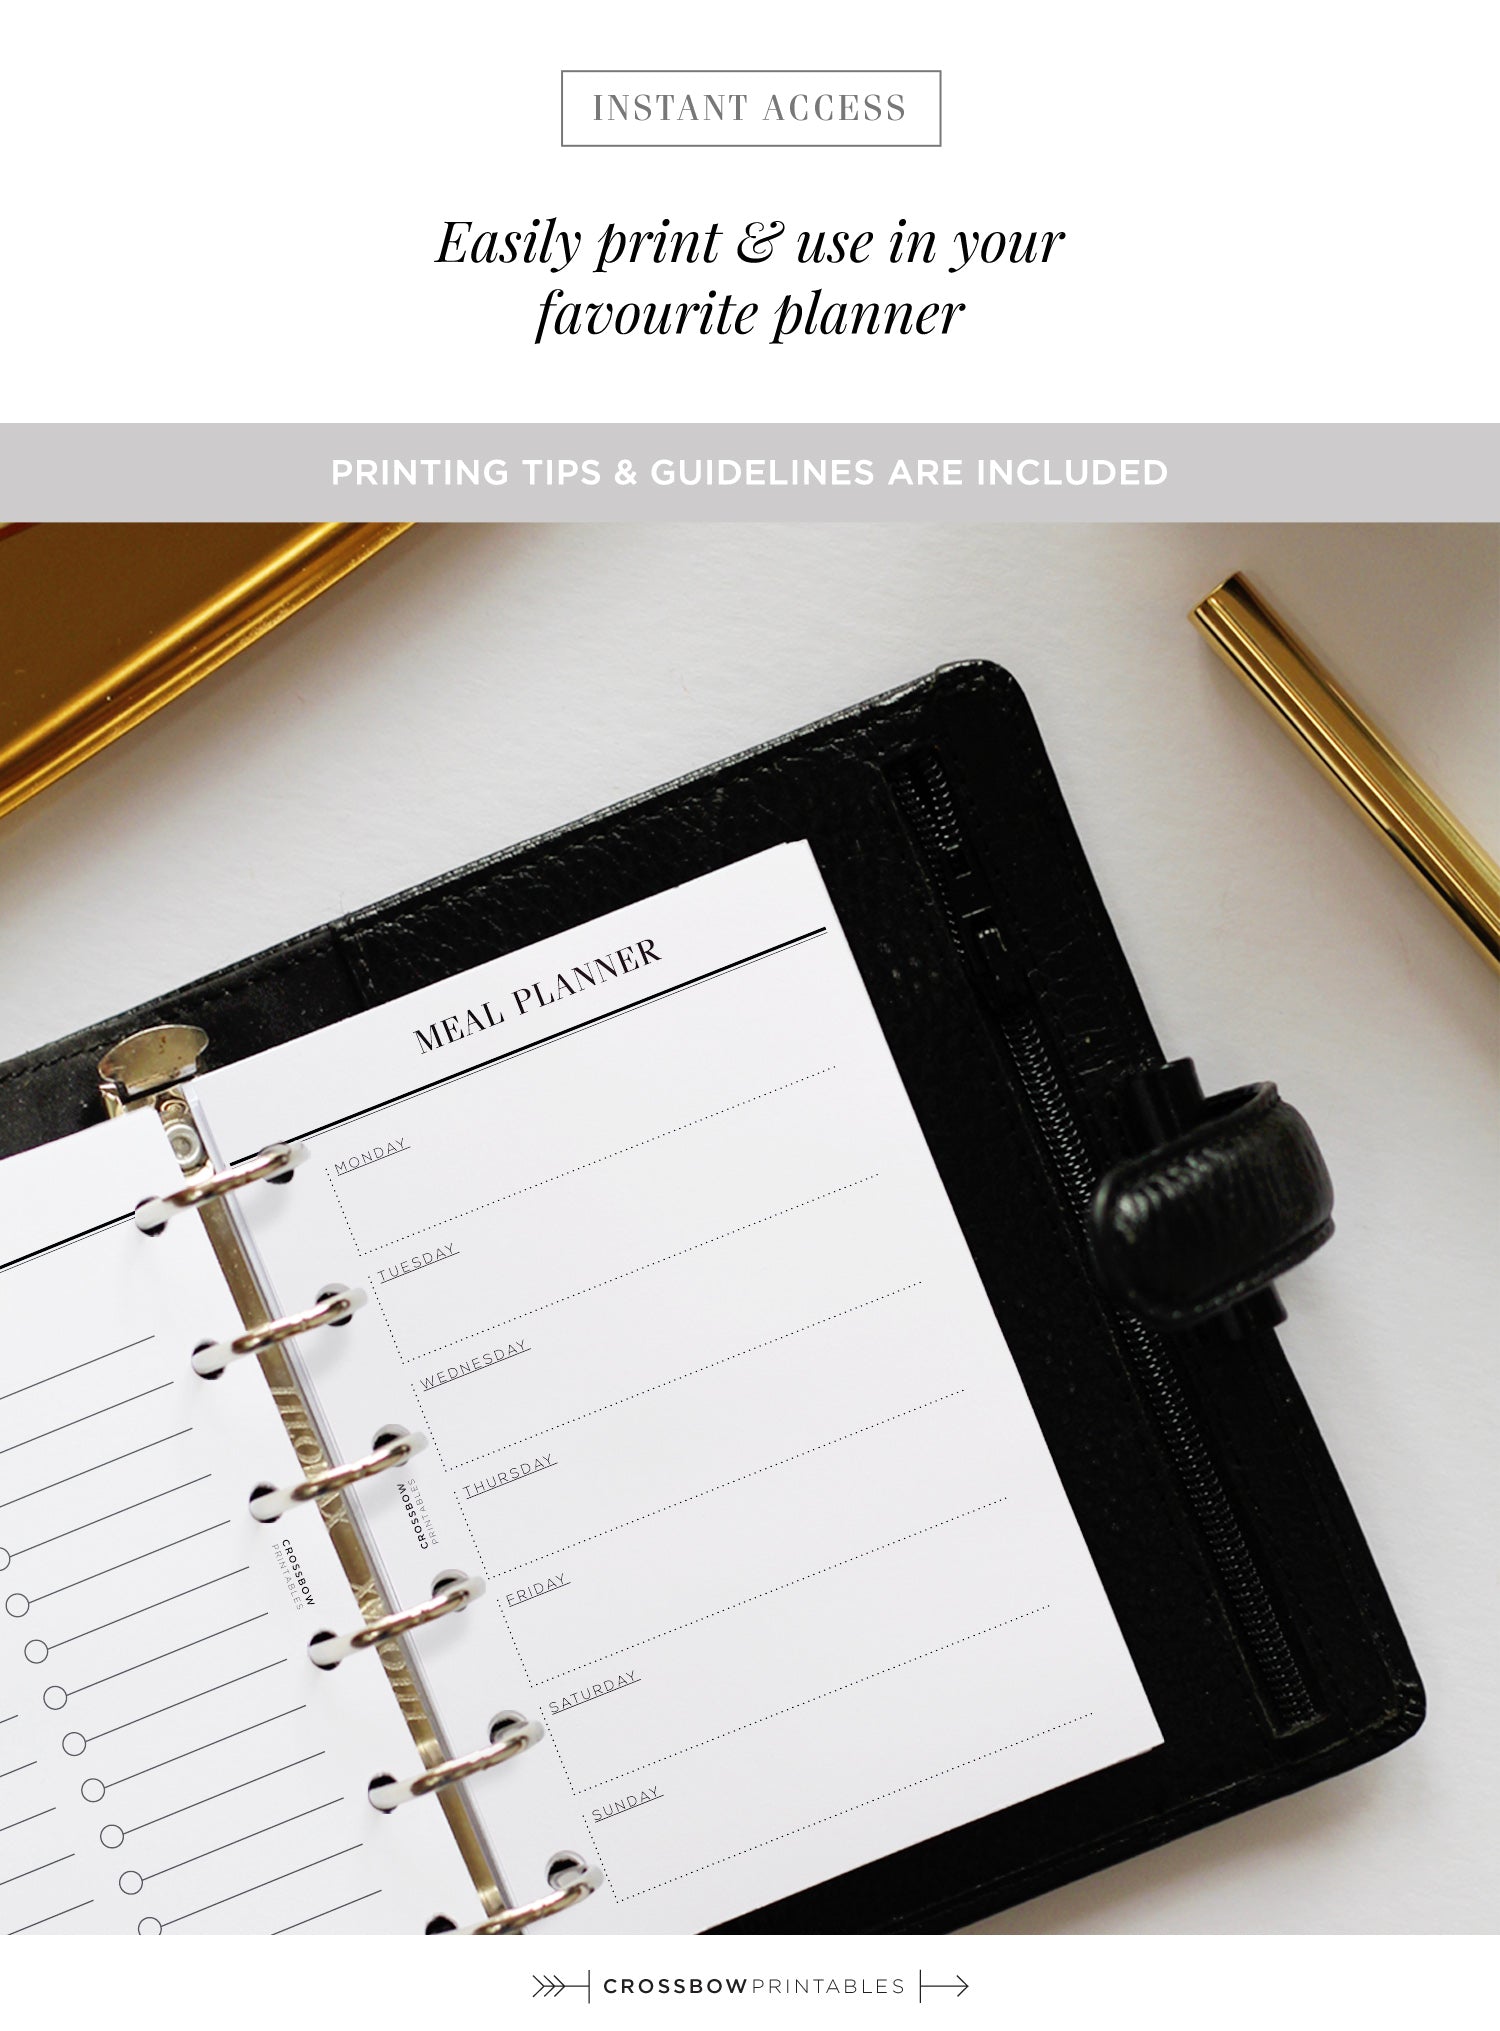 pocket meal planner and shopping list